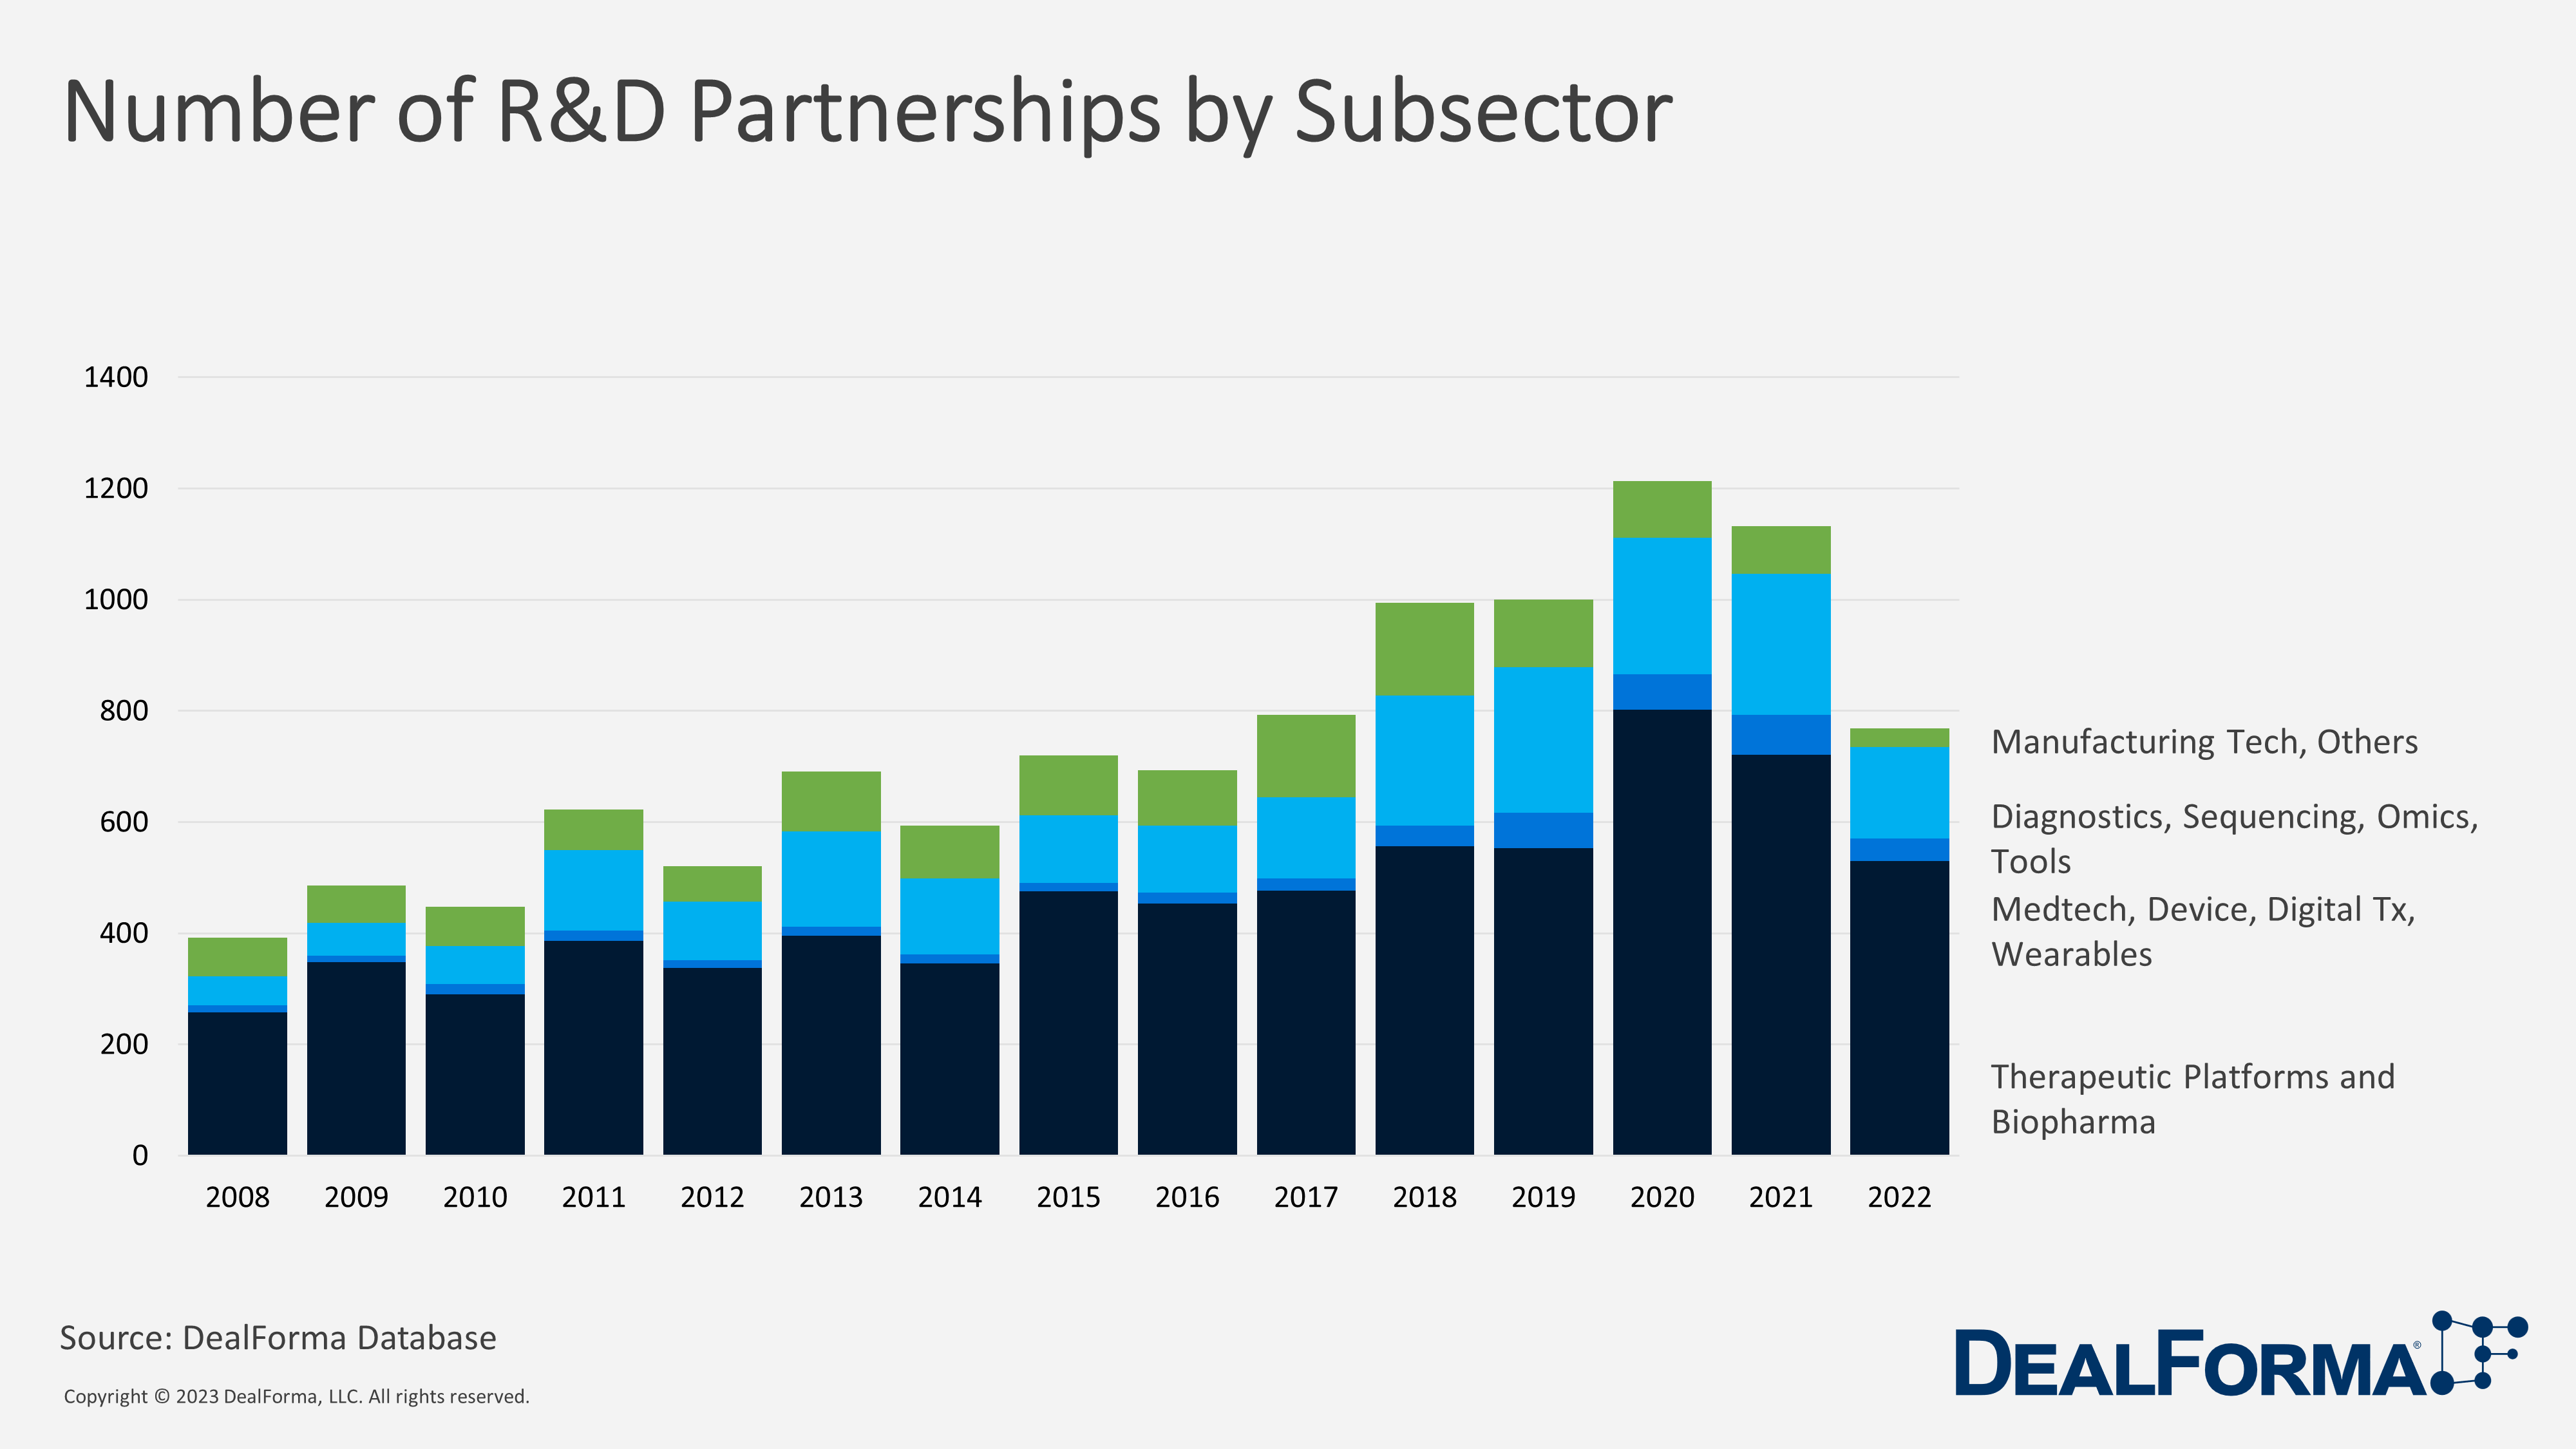 Number of R&D Partnerships by Subsector